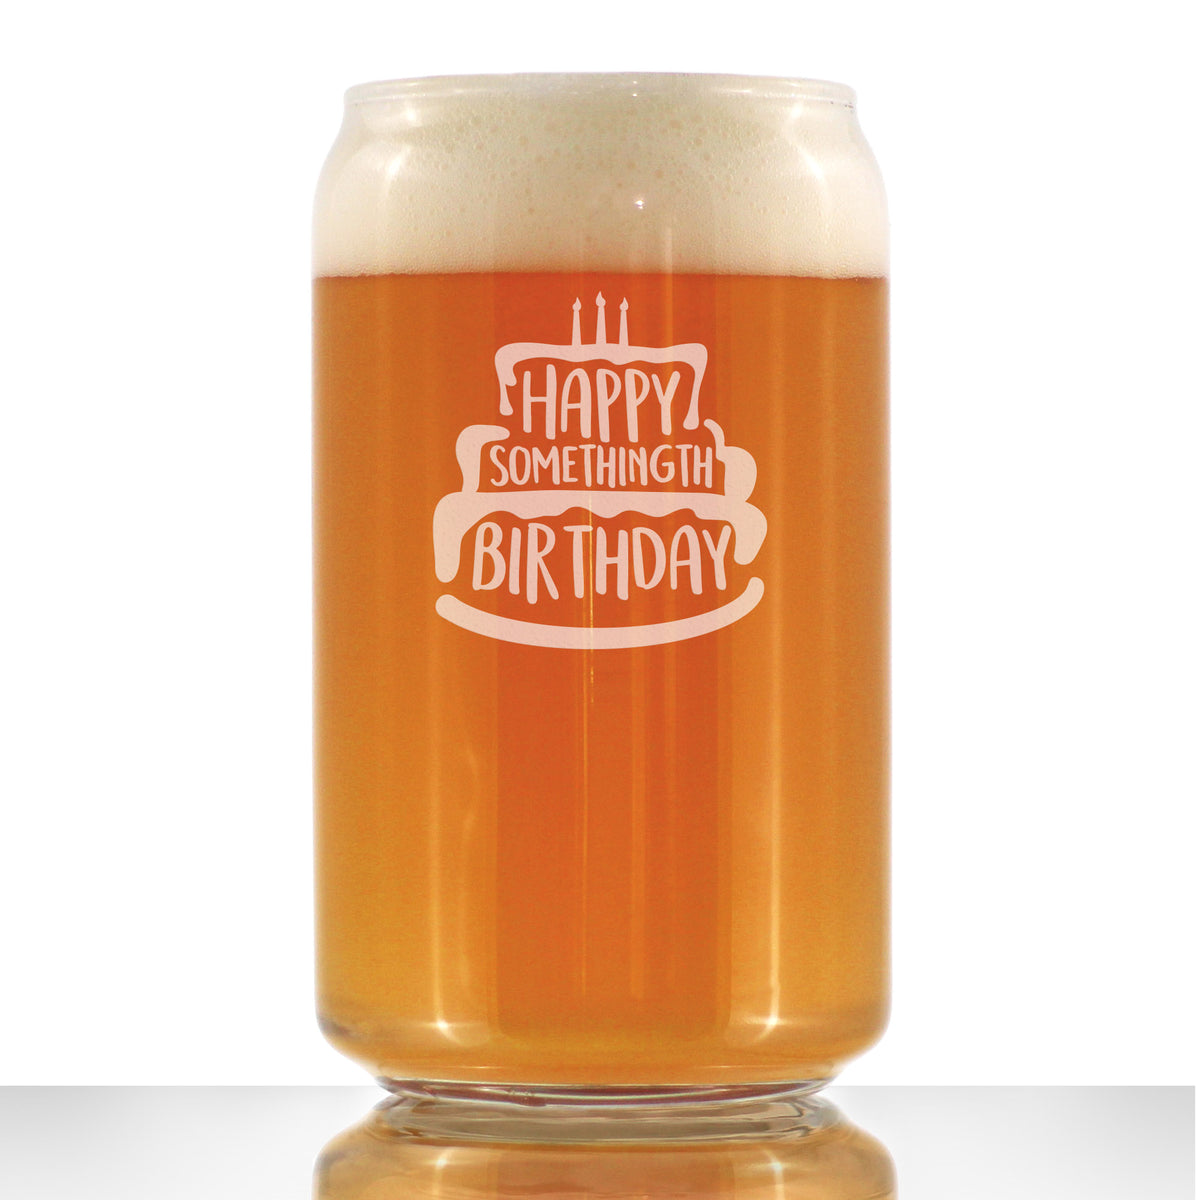 Somethingth Birthday - Funny 16 oz Beer Can Pint Glass - Fun Bday Gifts for Men or Women - Fun Party Decor